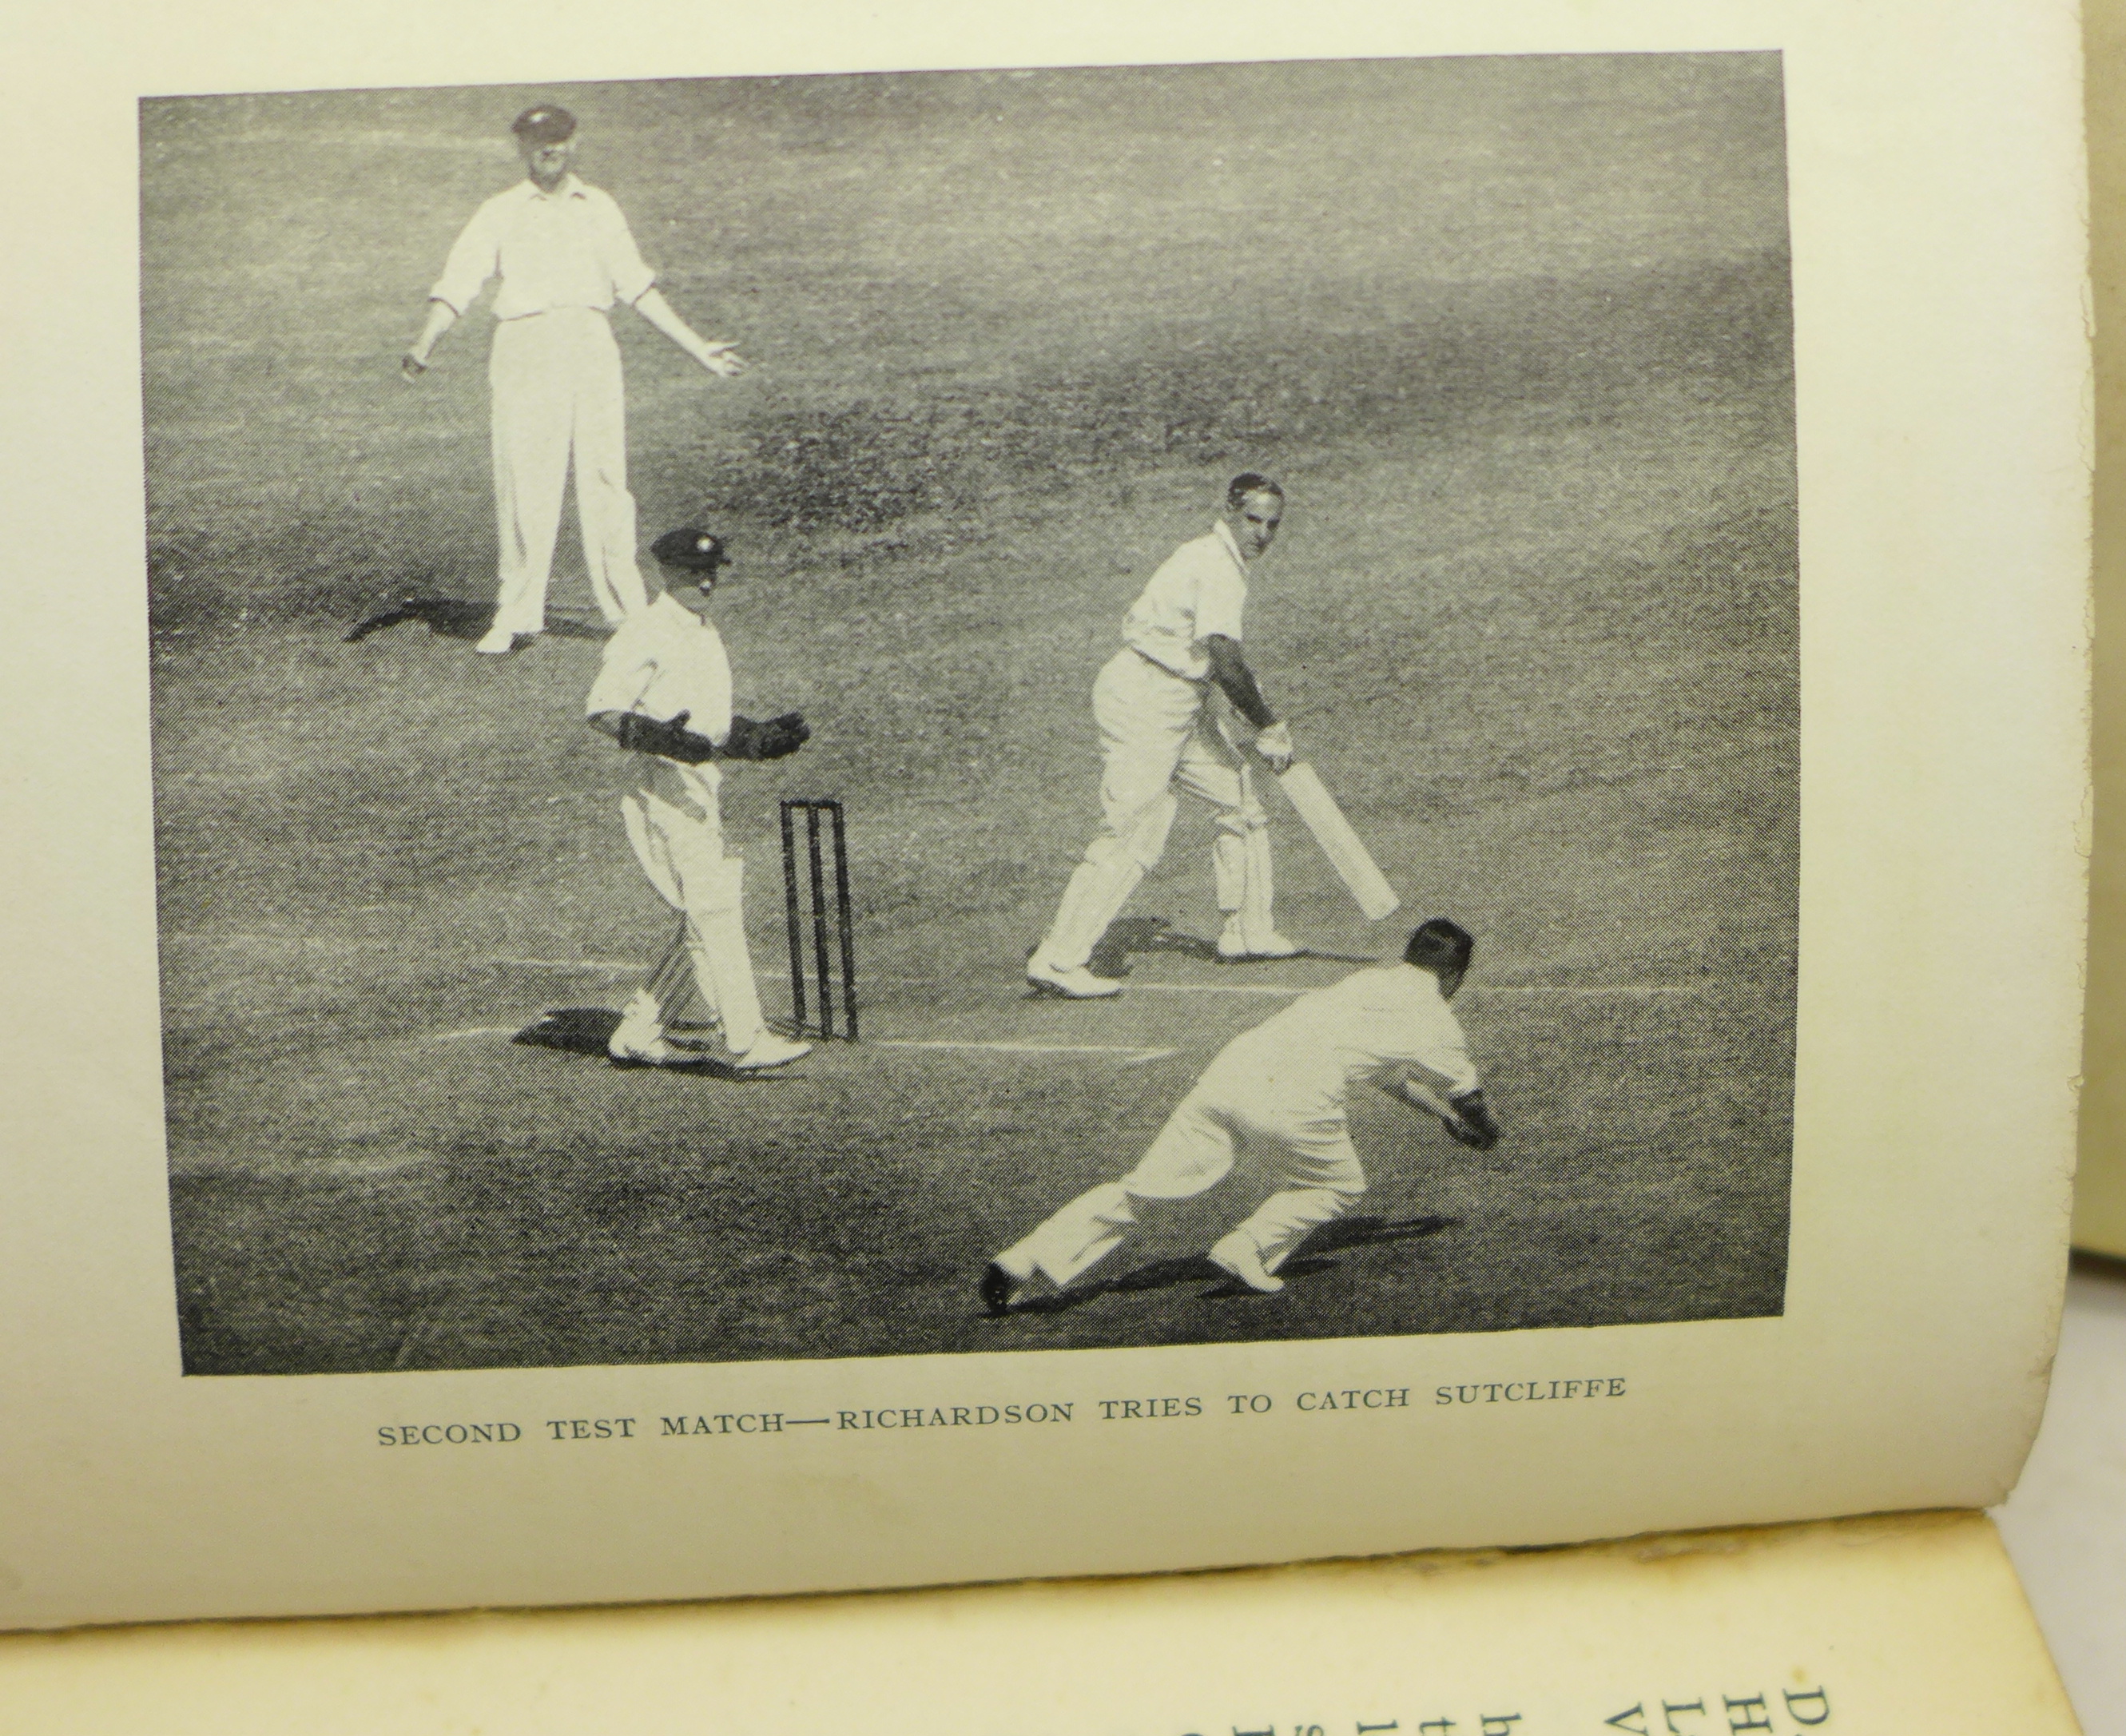 Two cricket books; In Quest of the Ashes by D.R. Jardine and Cricket by W.G. - Image 5 of 7